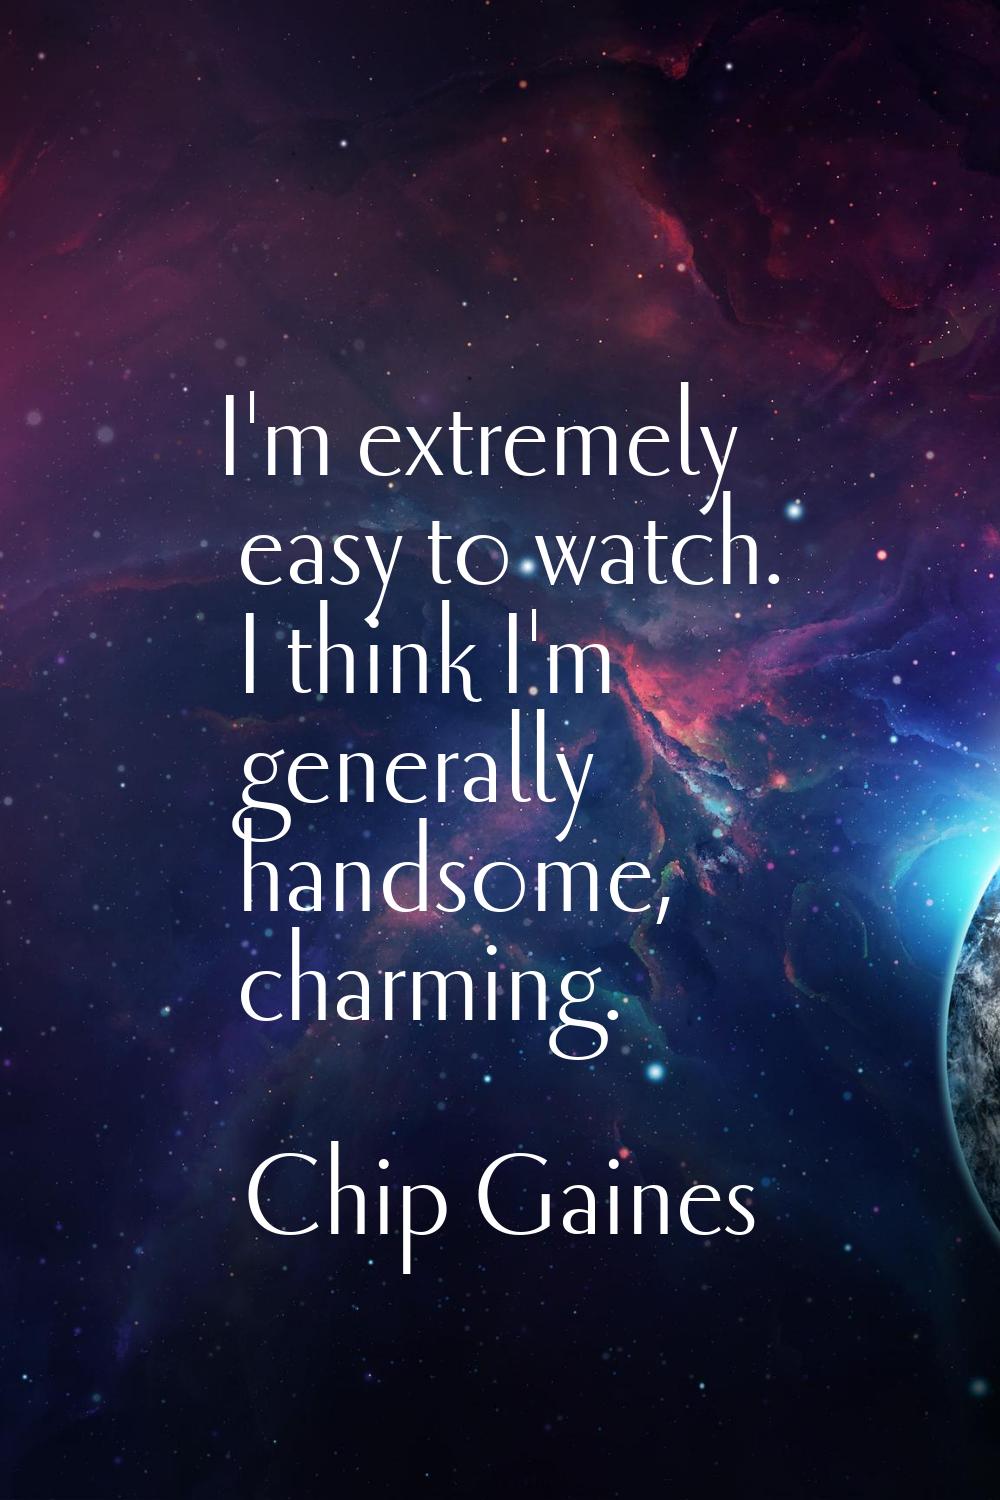 I'm extremely easy to watch. I think I'm generally handsome, charming.